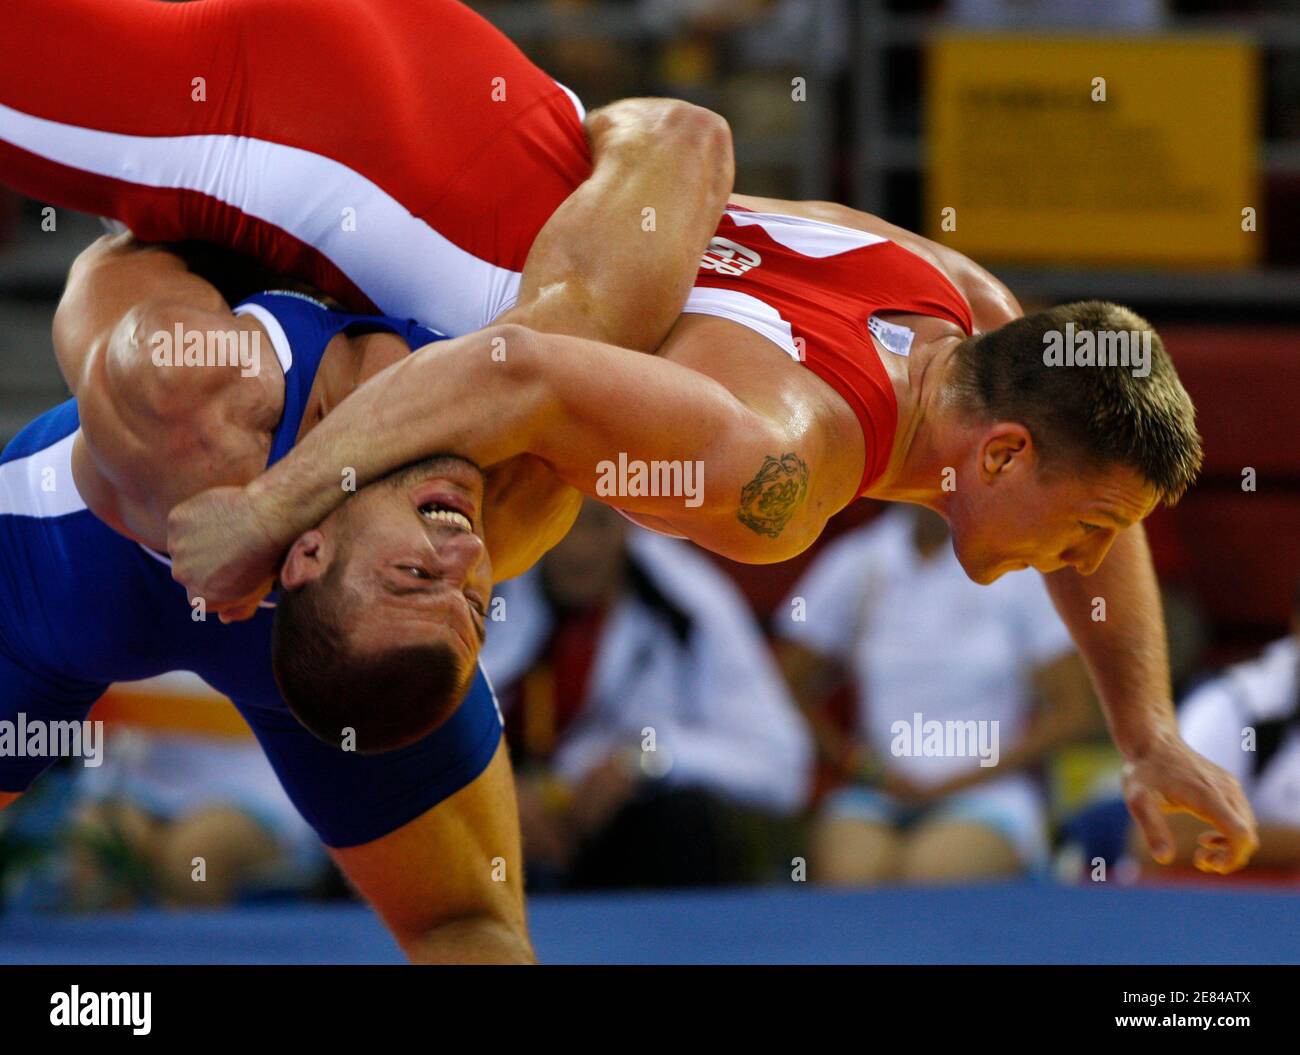 Mirko Englich of Germany (top) fights Elis Guri of Albania during their 96kg men's Greco-Roman wrestling quarter-final match at the Beijing 2008 Olympic Games August 14, 2008.     REUTERS/Oleg Popov (CHINA) Stock Photo